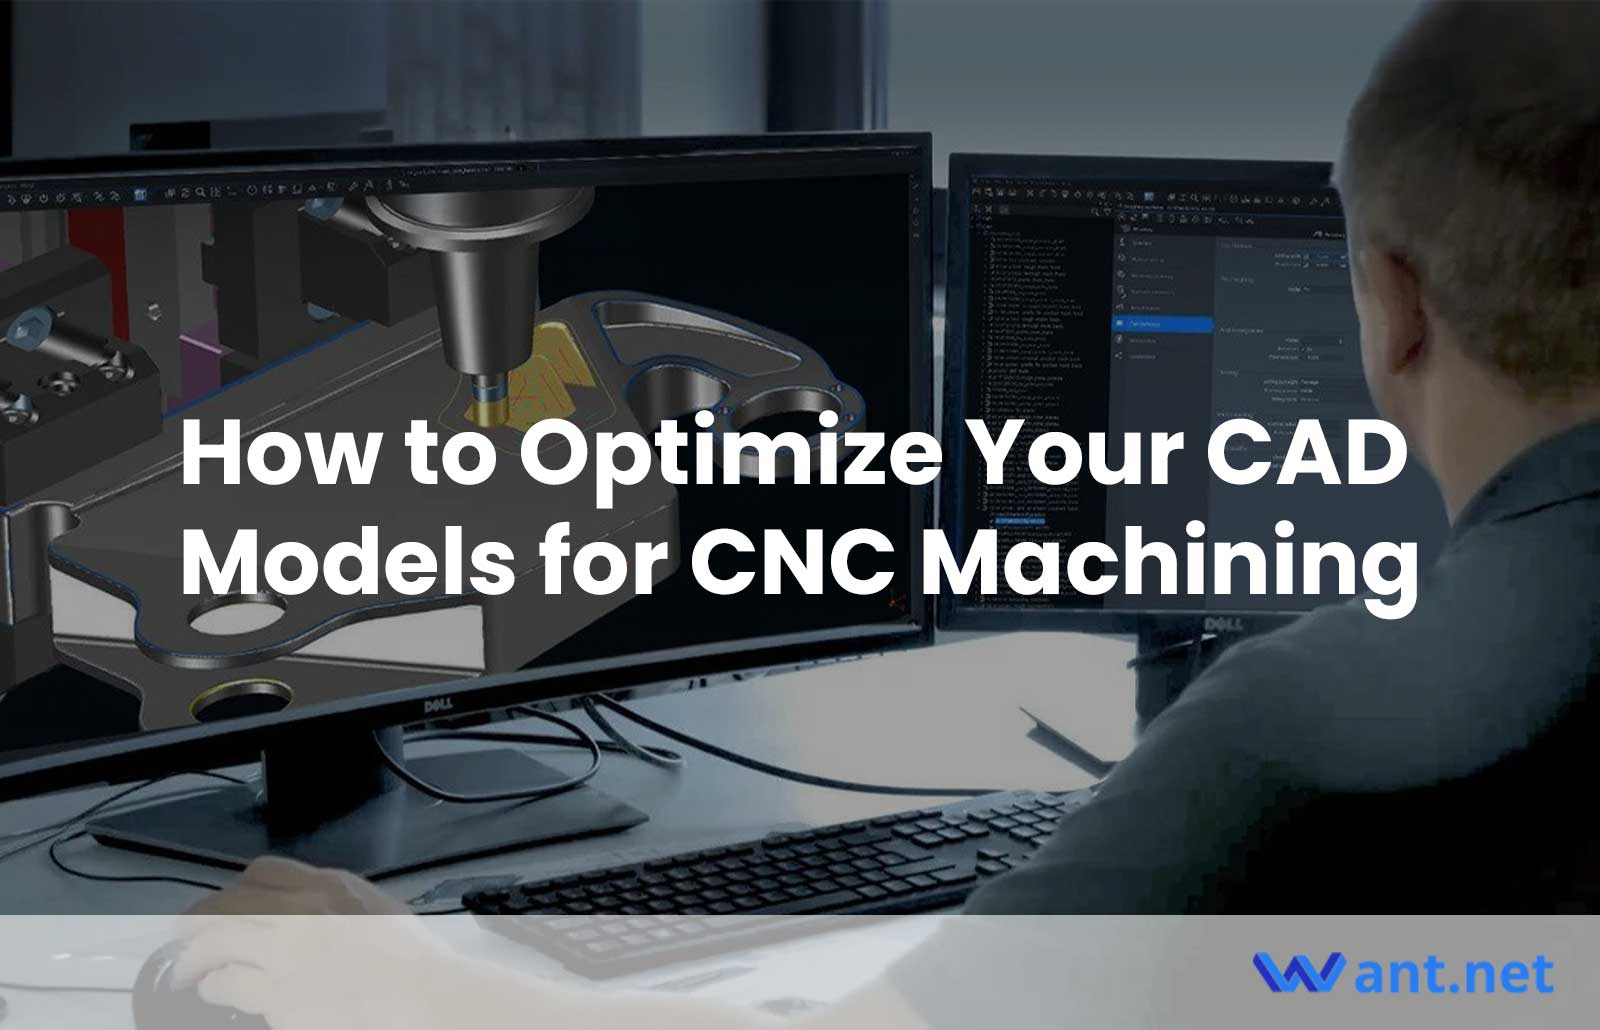 How to Optimize Your CAD Models for CNC Machining